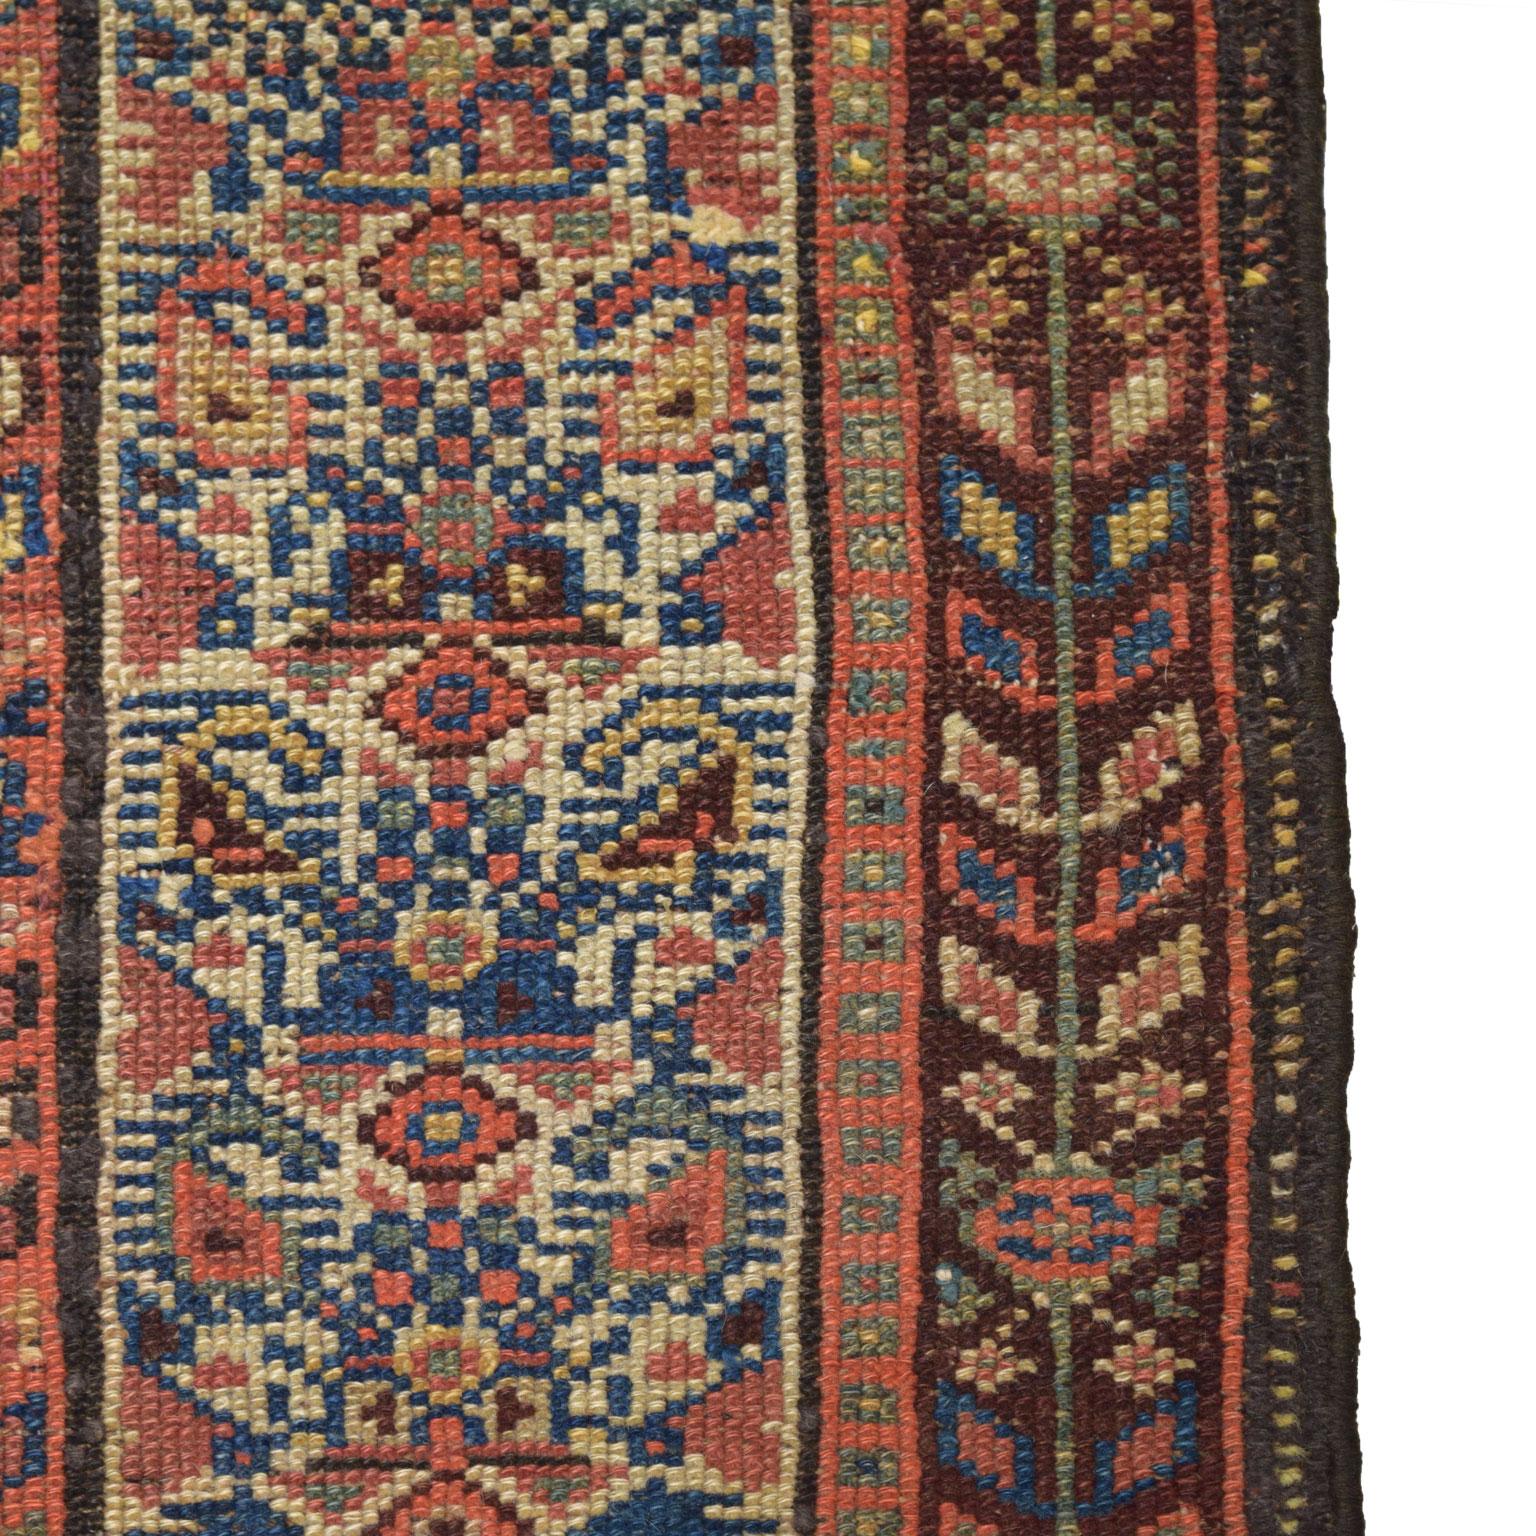 Antique 1900s Wool Persian Saraband Rug, Blue, Red, and Orange, 5' x 7' For Sale 2